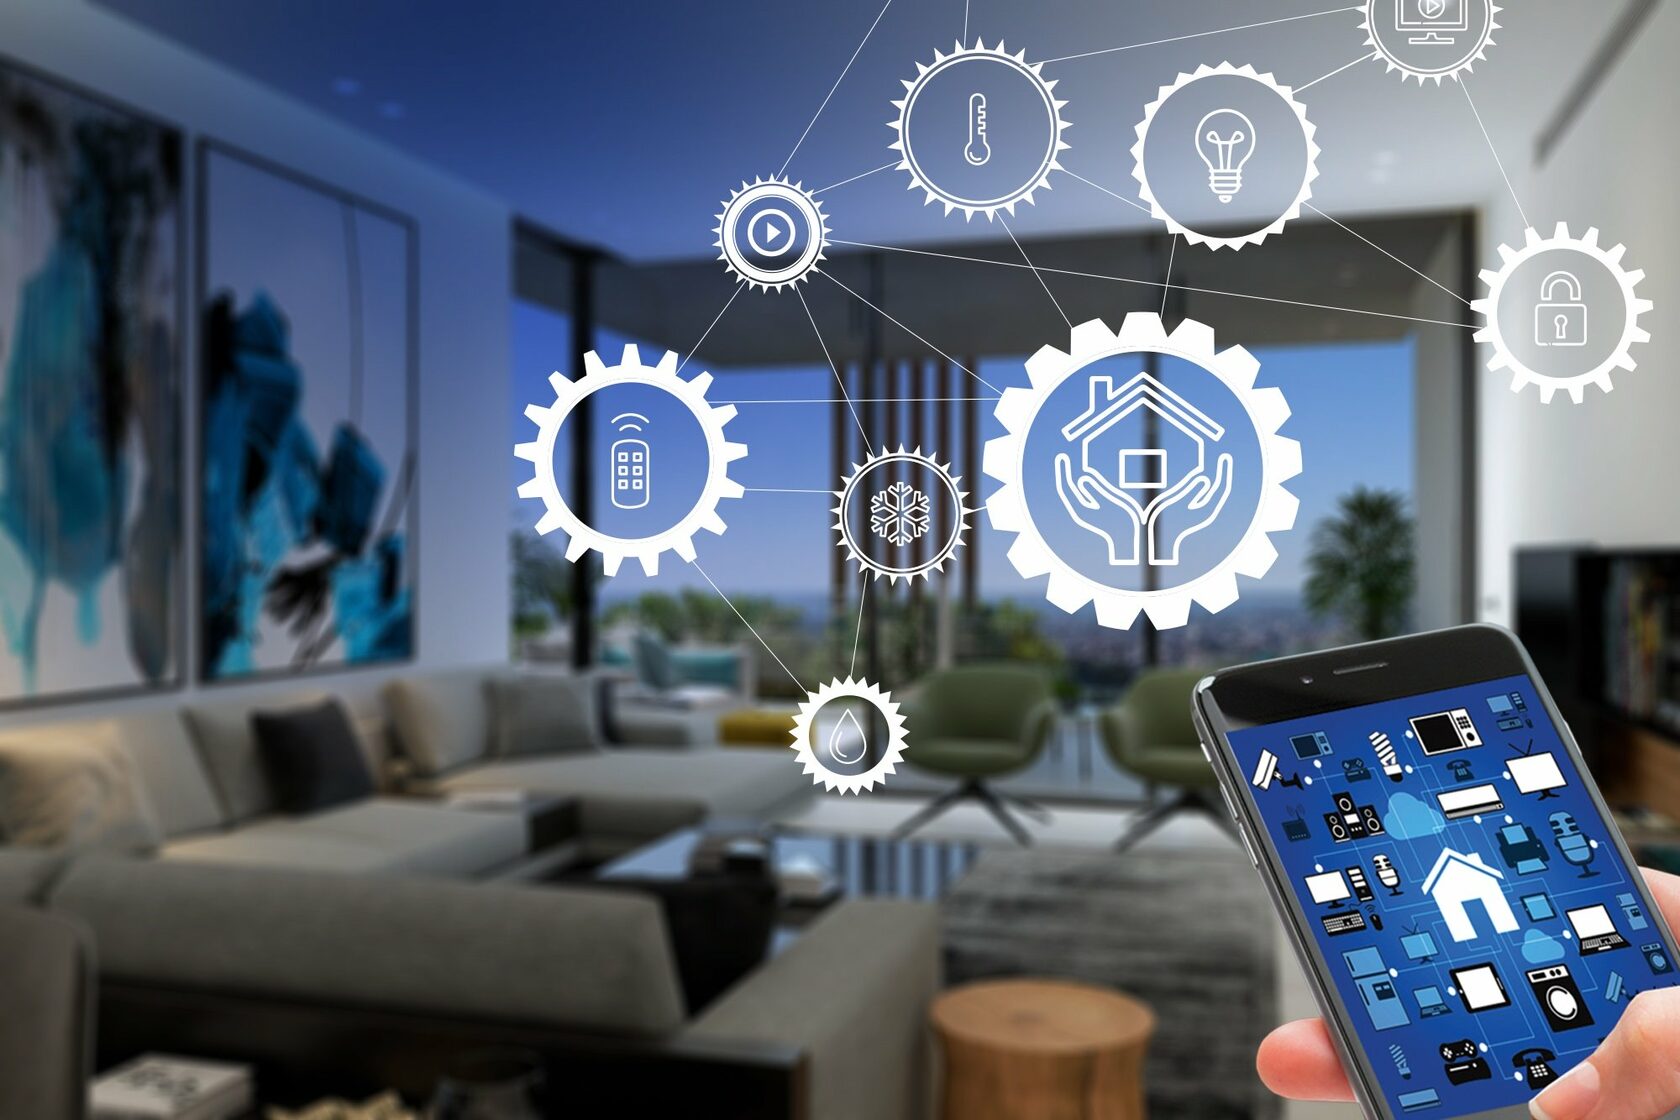 Smart Home as a Service Market Rapidly Expanding, Expected to Reach US$ 3,952.9 Mn by 2022